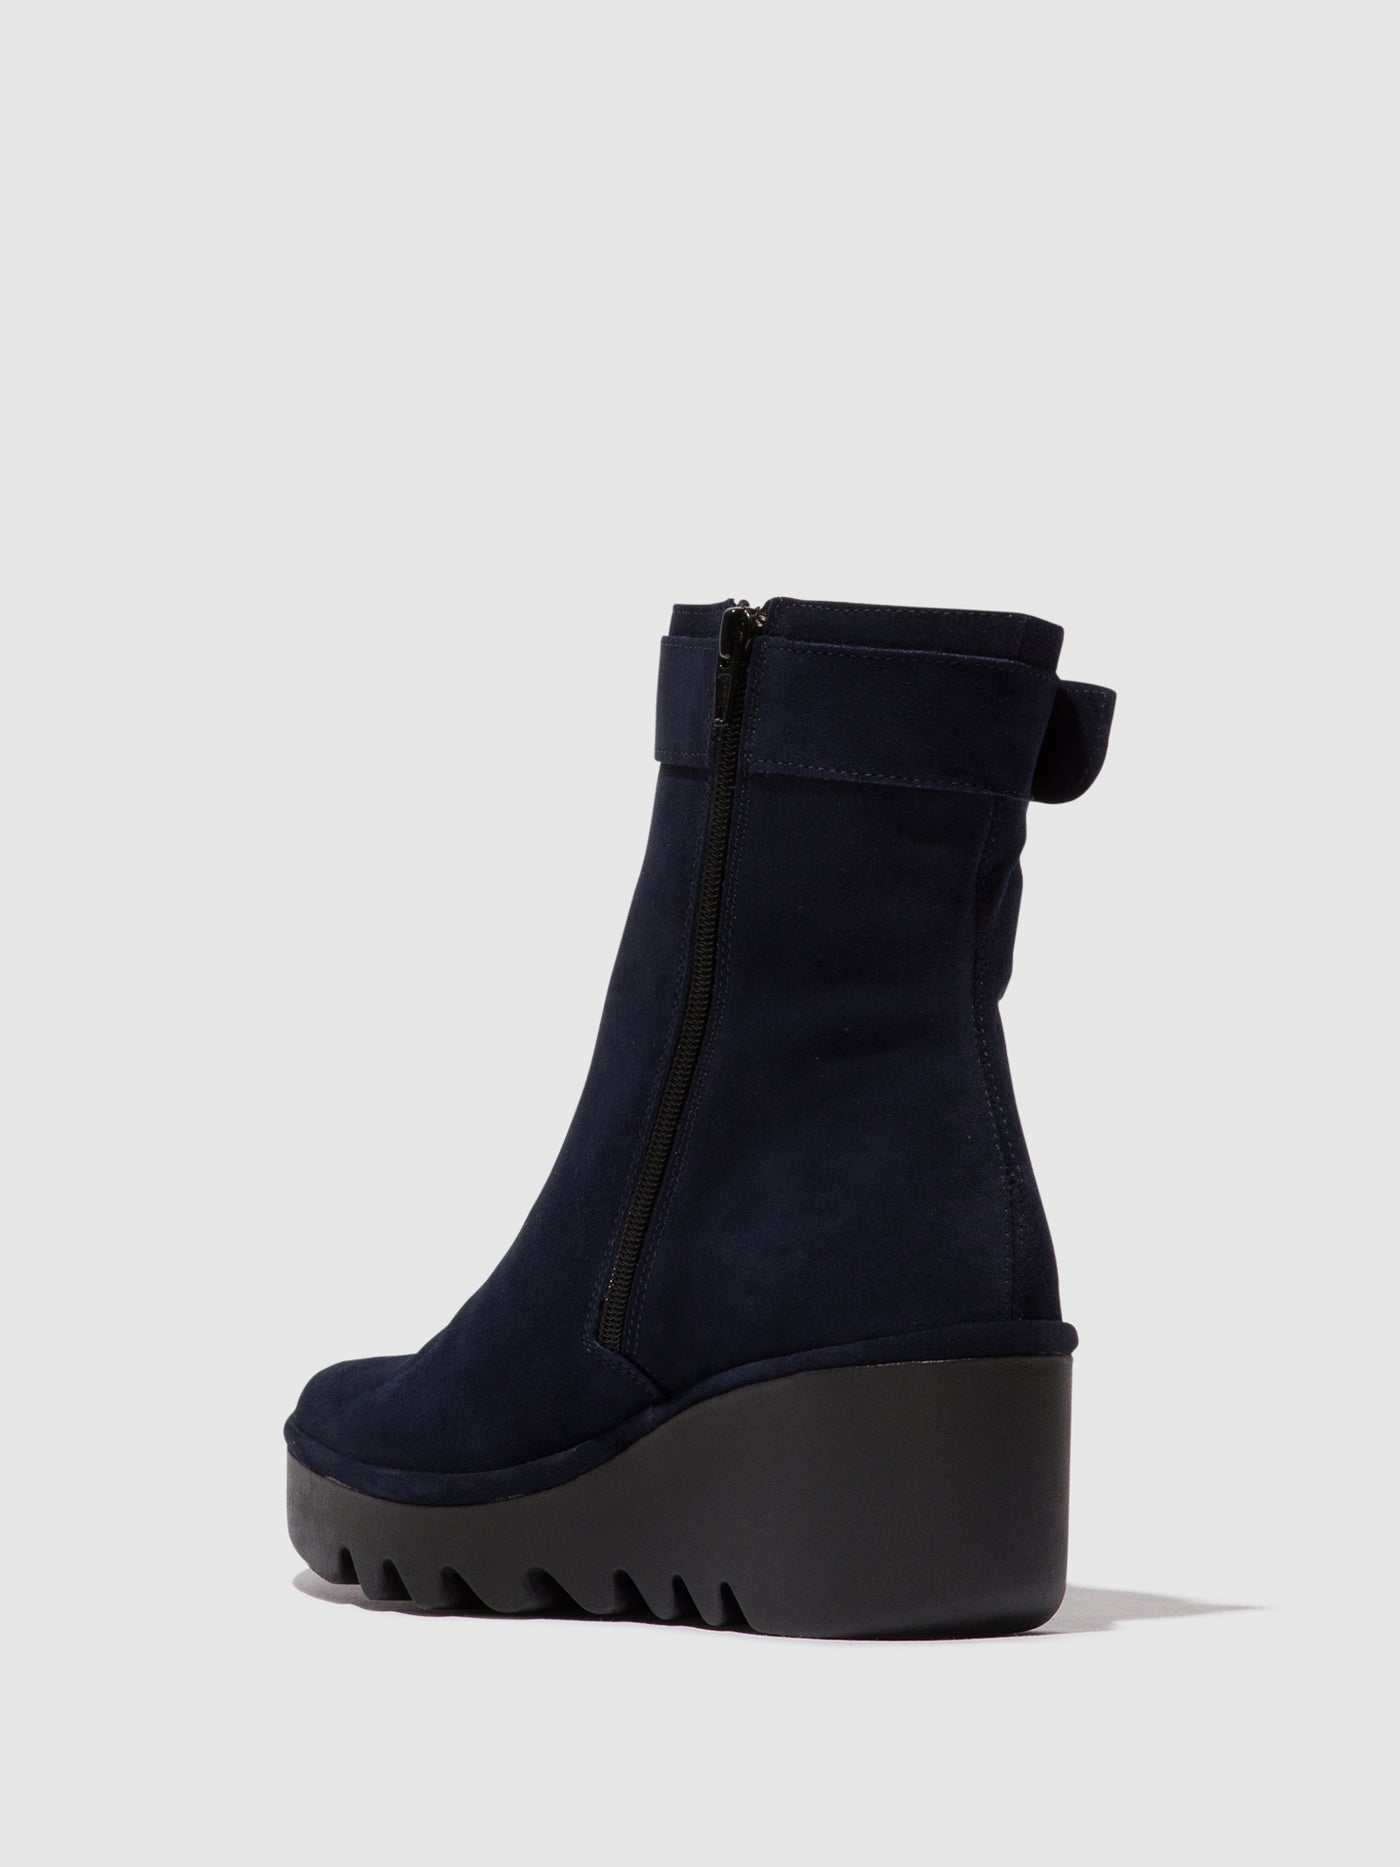 Zip Up Ankle Boots BEPP396FLY NAVY